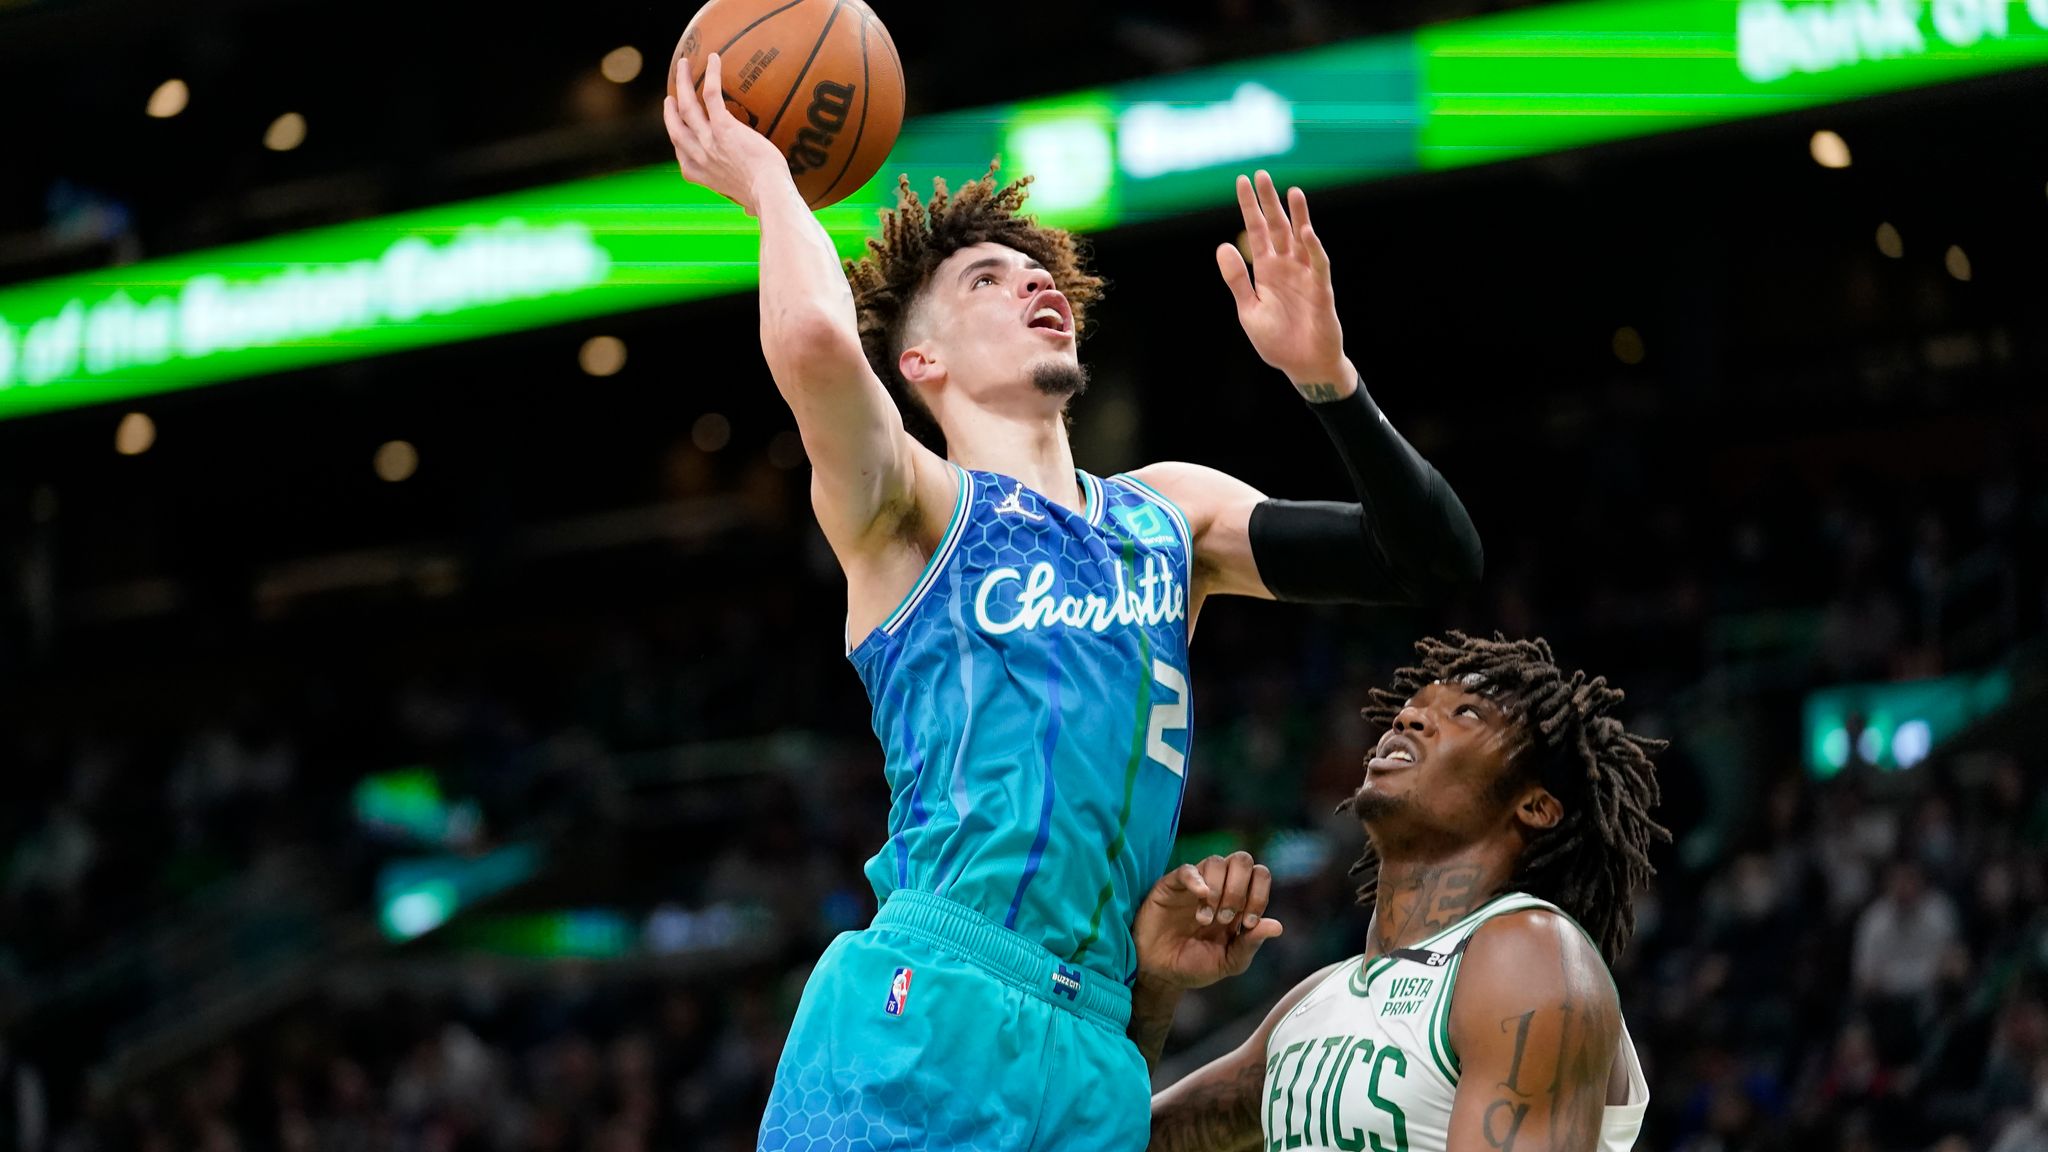 Shop Lamelo Ball Buzz City Jersey with great discounts and prices